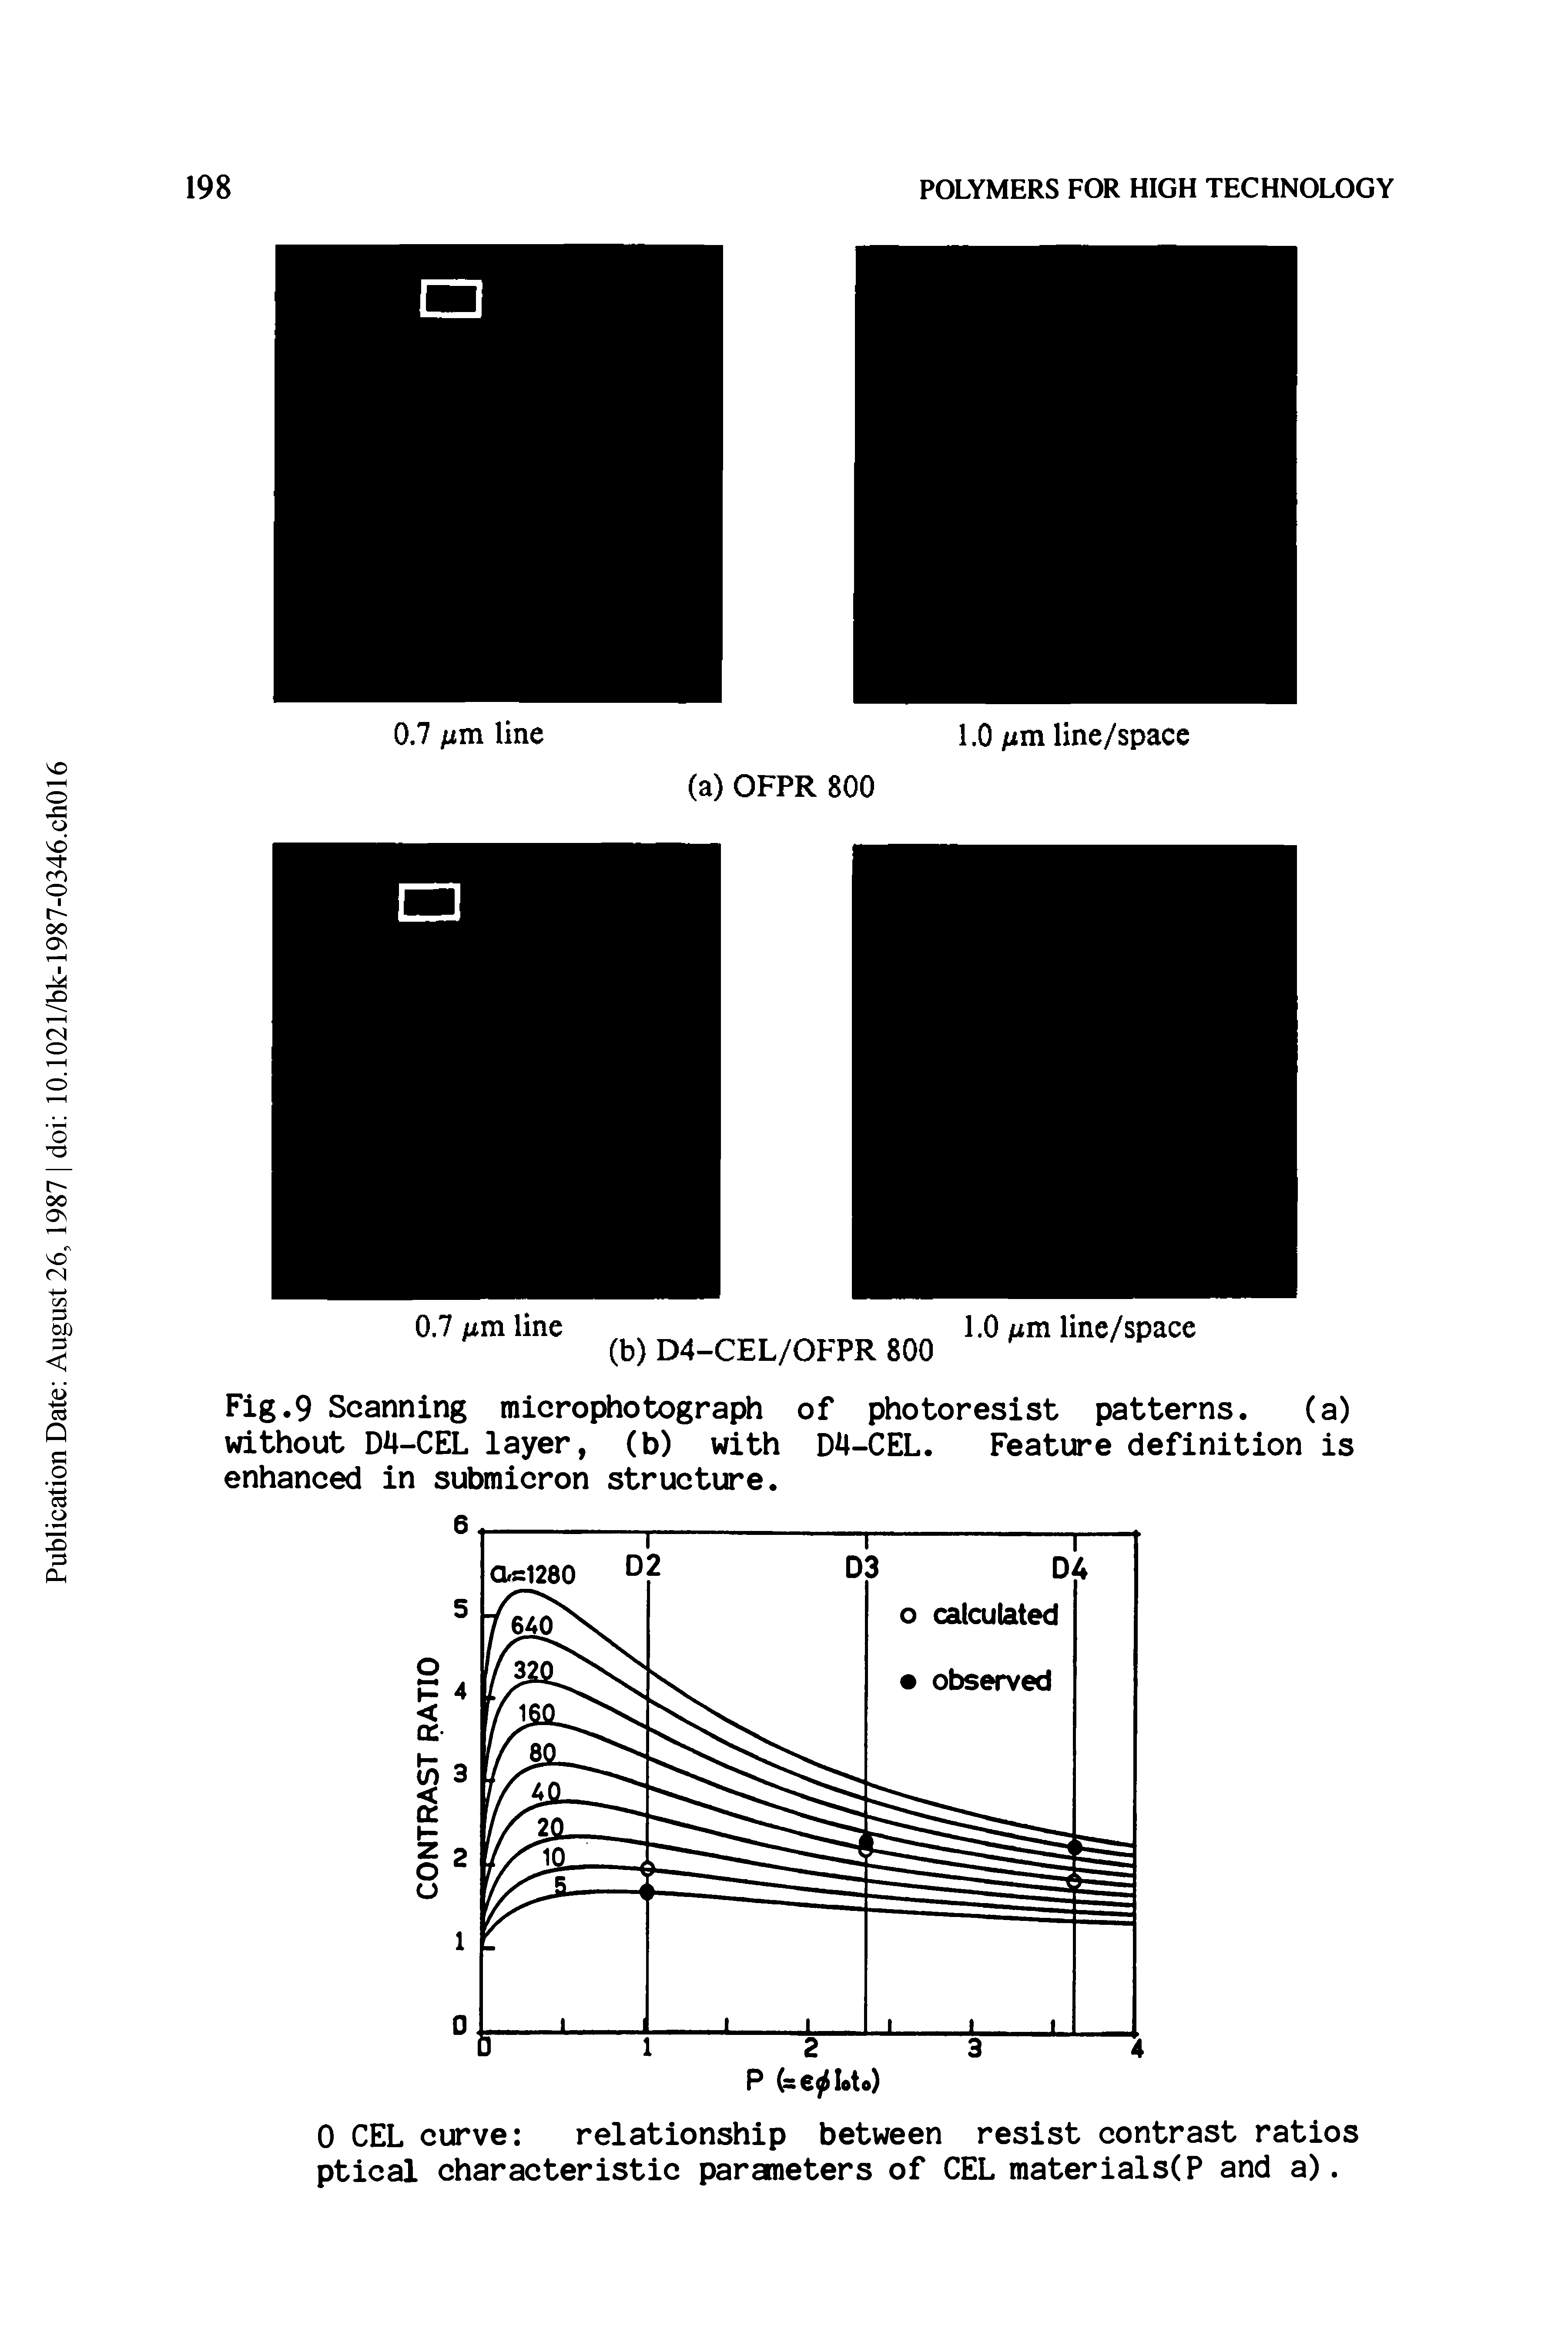 Fig.9 Scanning microphotxjgraph of photoresist patterns. (a) without D4-CEL layer, (b) with D4-CEL. Feature definition is enhanced in submicron structure.